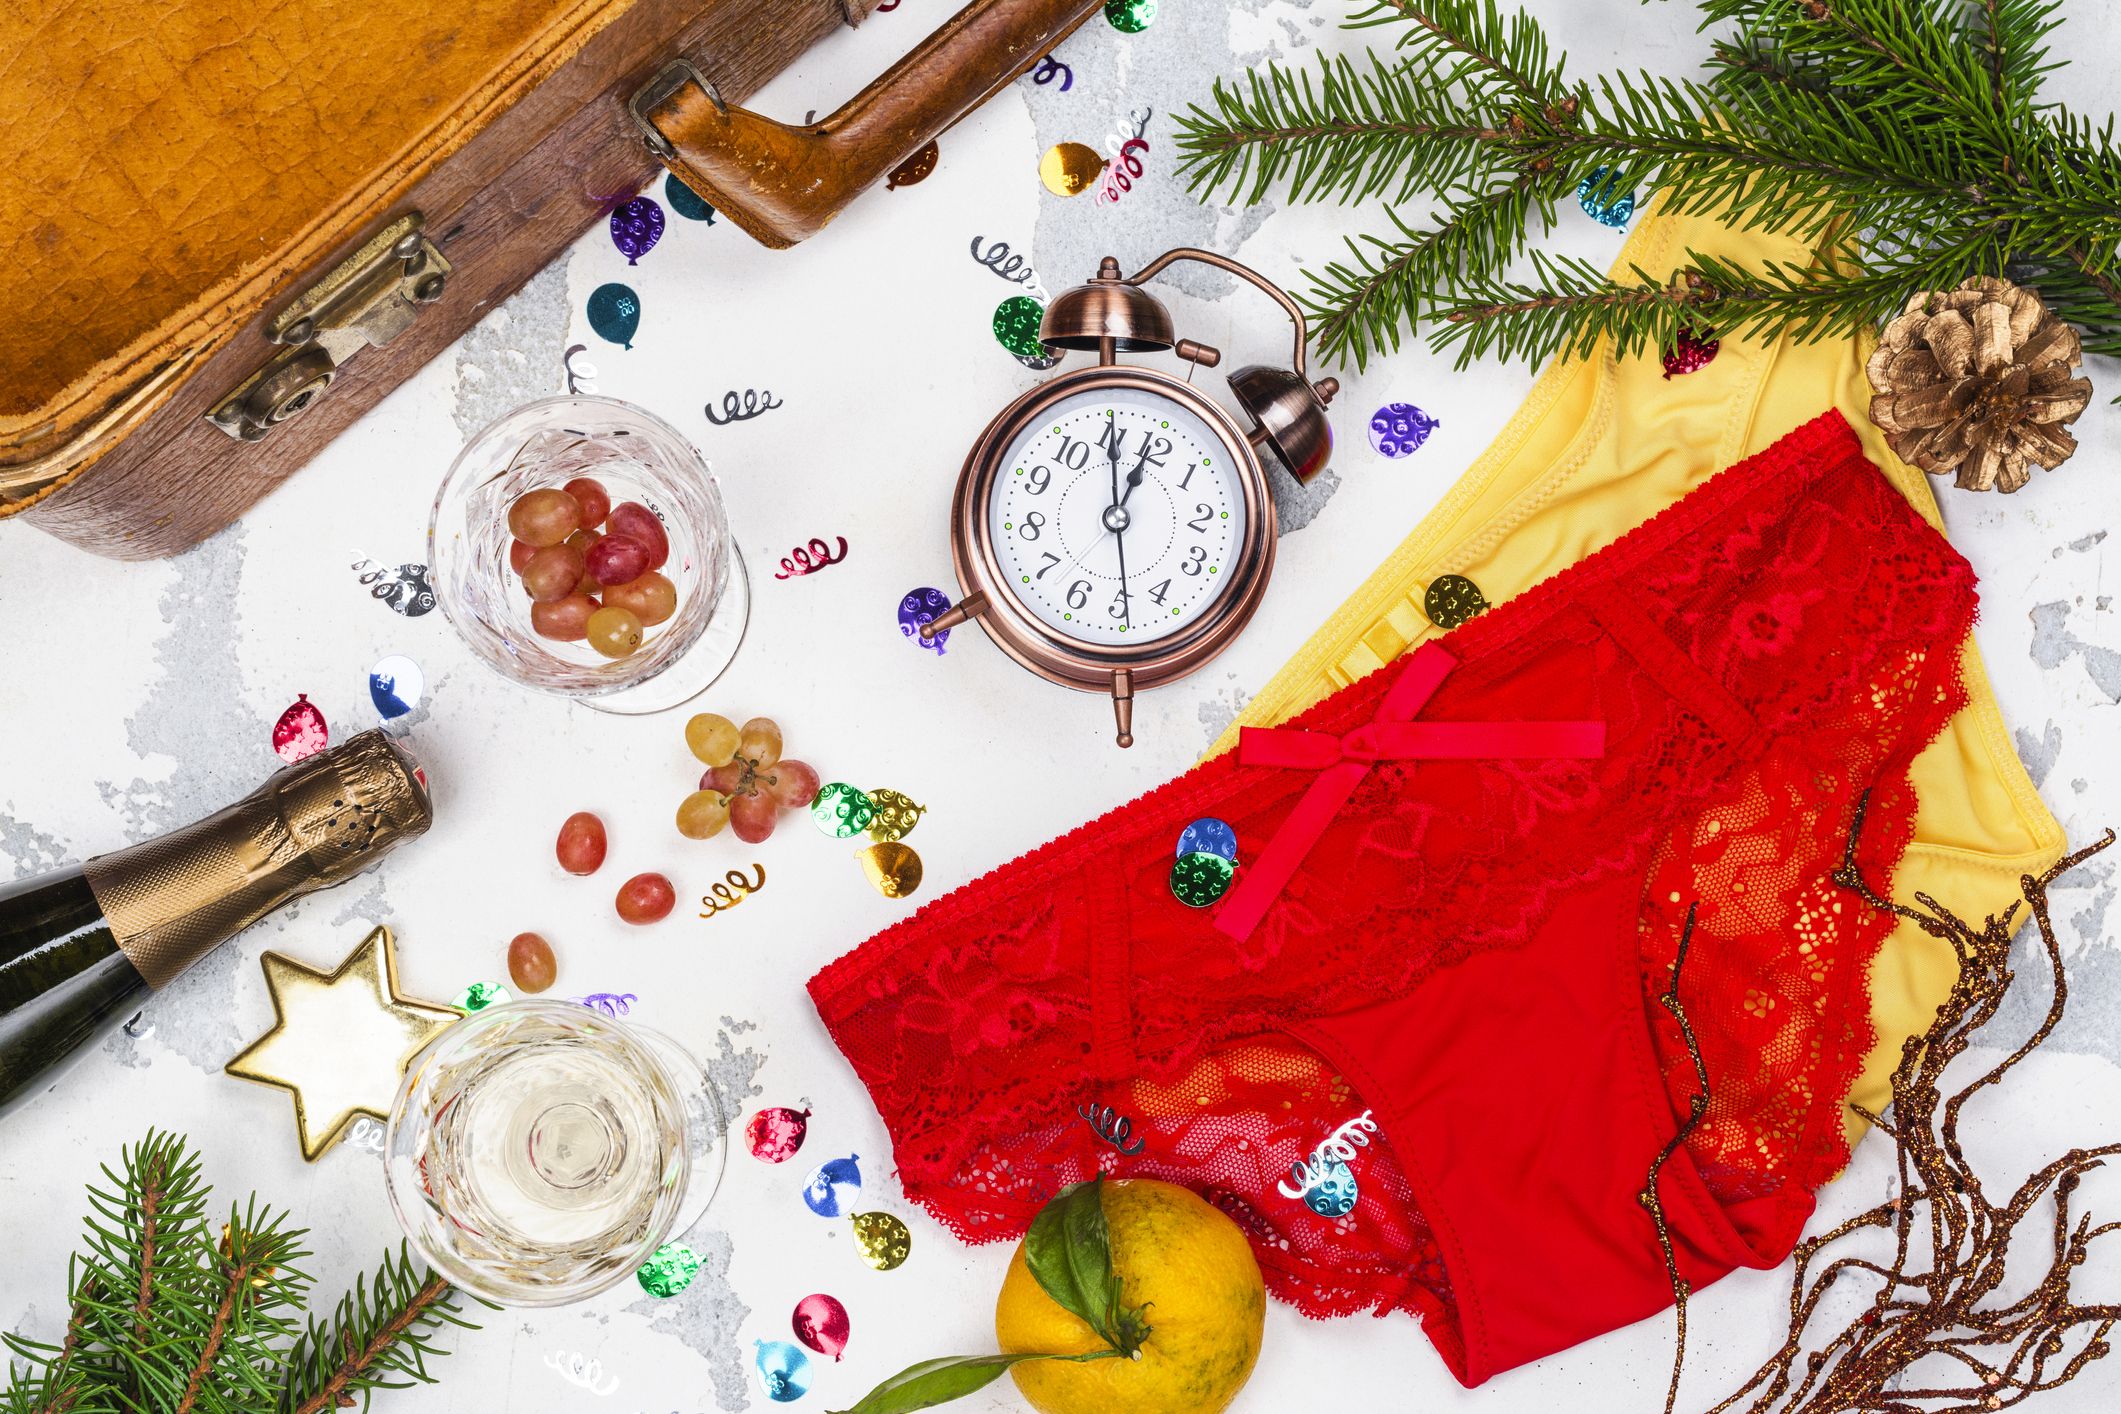 The Underwear Colours to wear on New Year's Eve to make the most